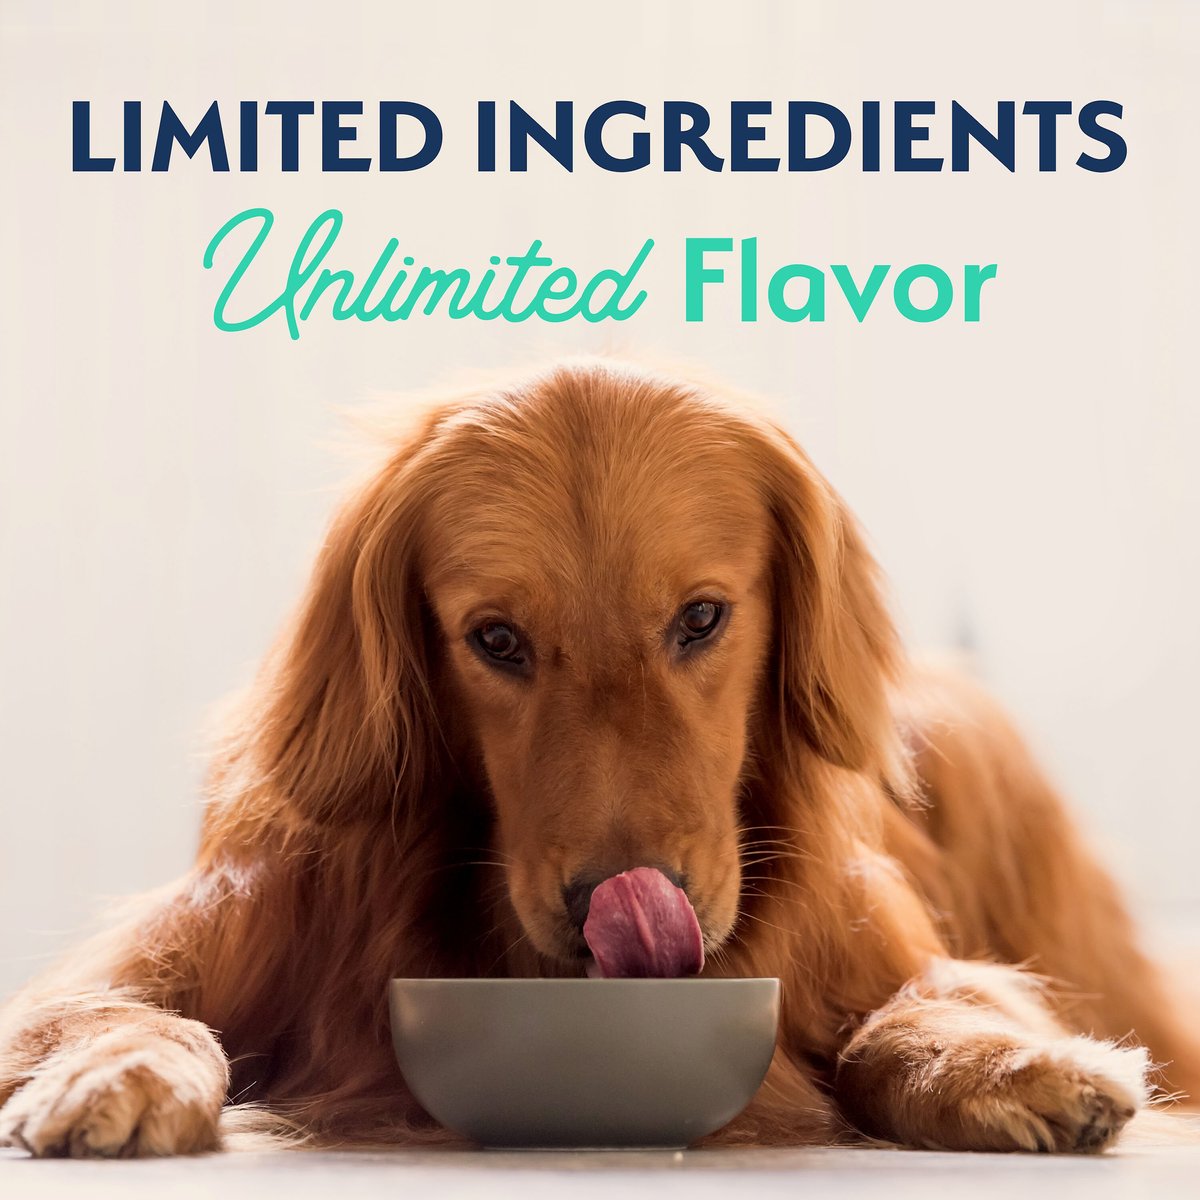 Natural Balance Limited Ingredient Diet Sweet Potato & Chicken Dog Food  Dog Food  | PetMax Canada